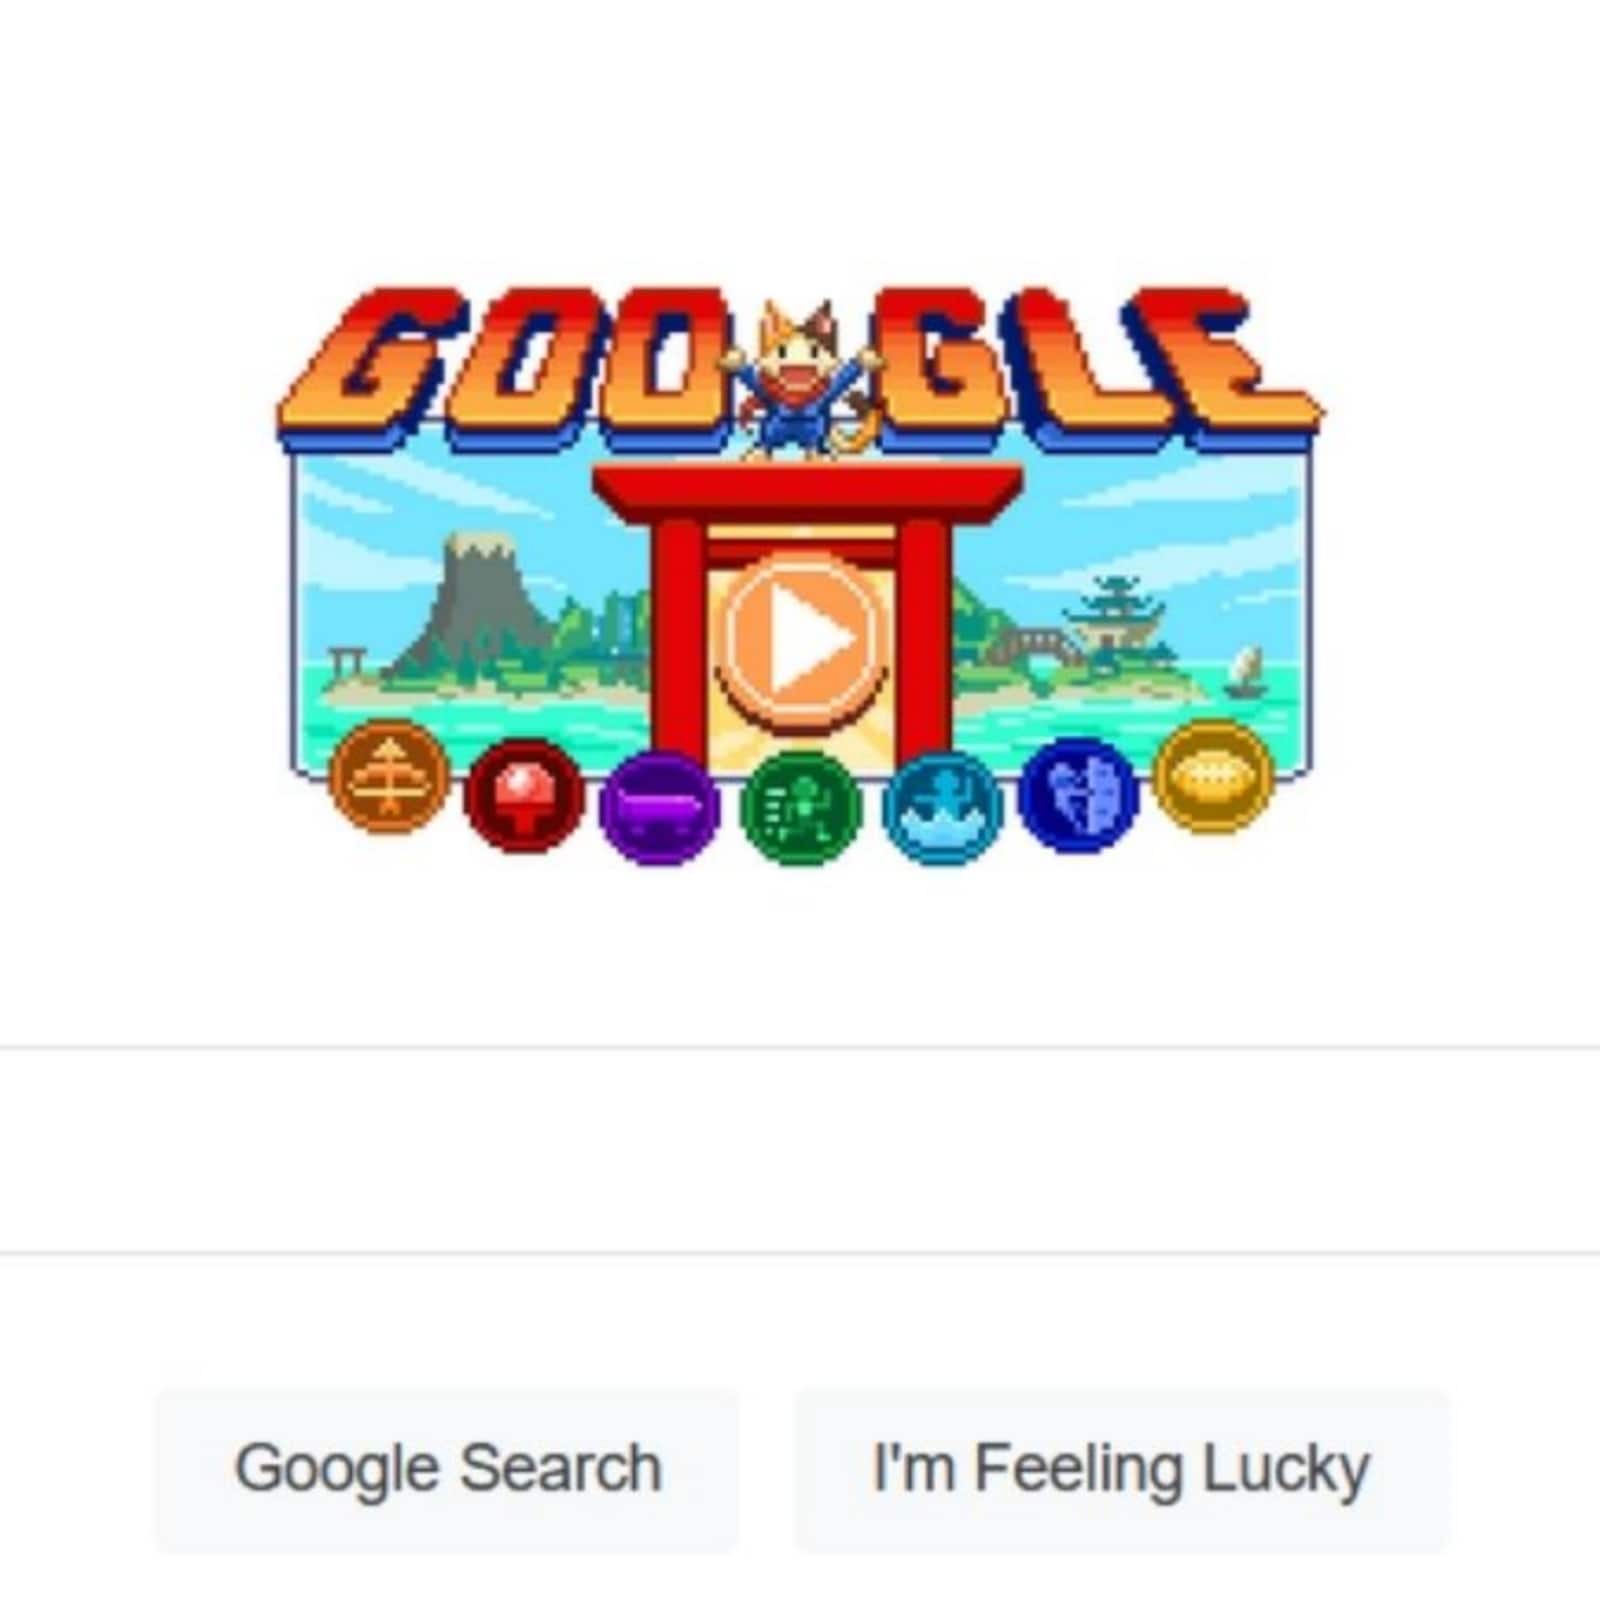 Today's Google doodle is an anime-infused sports game